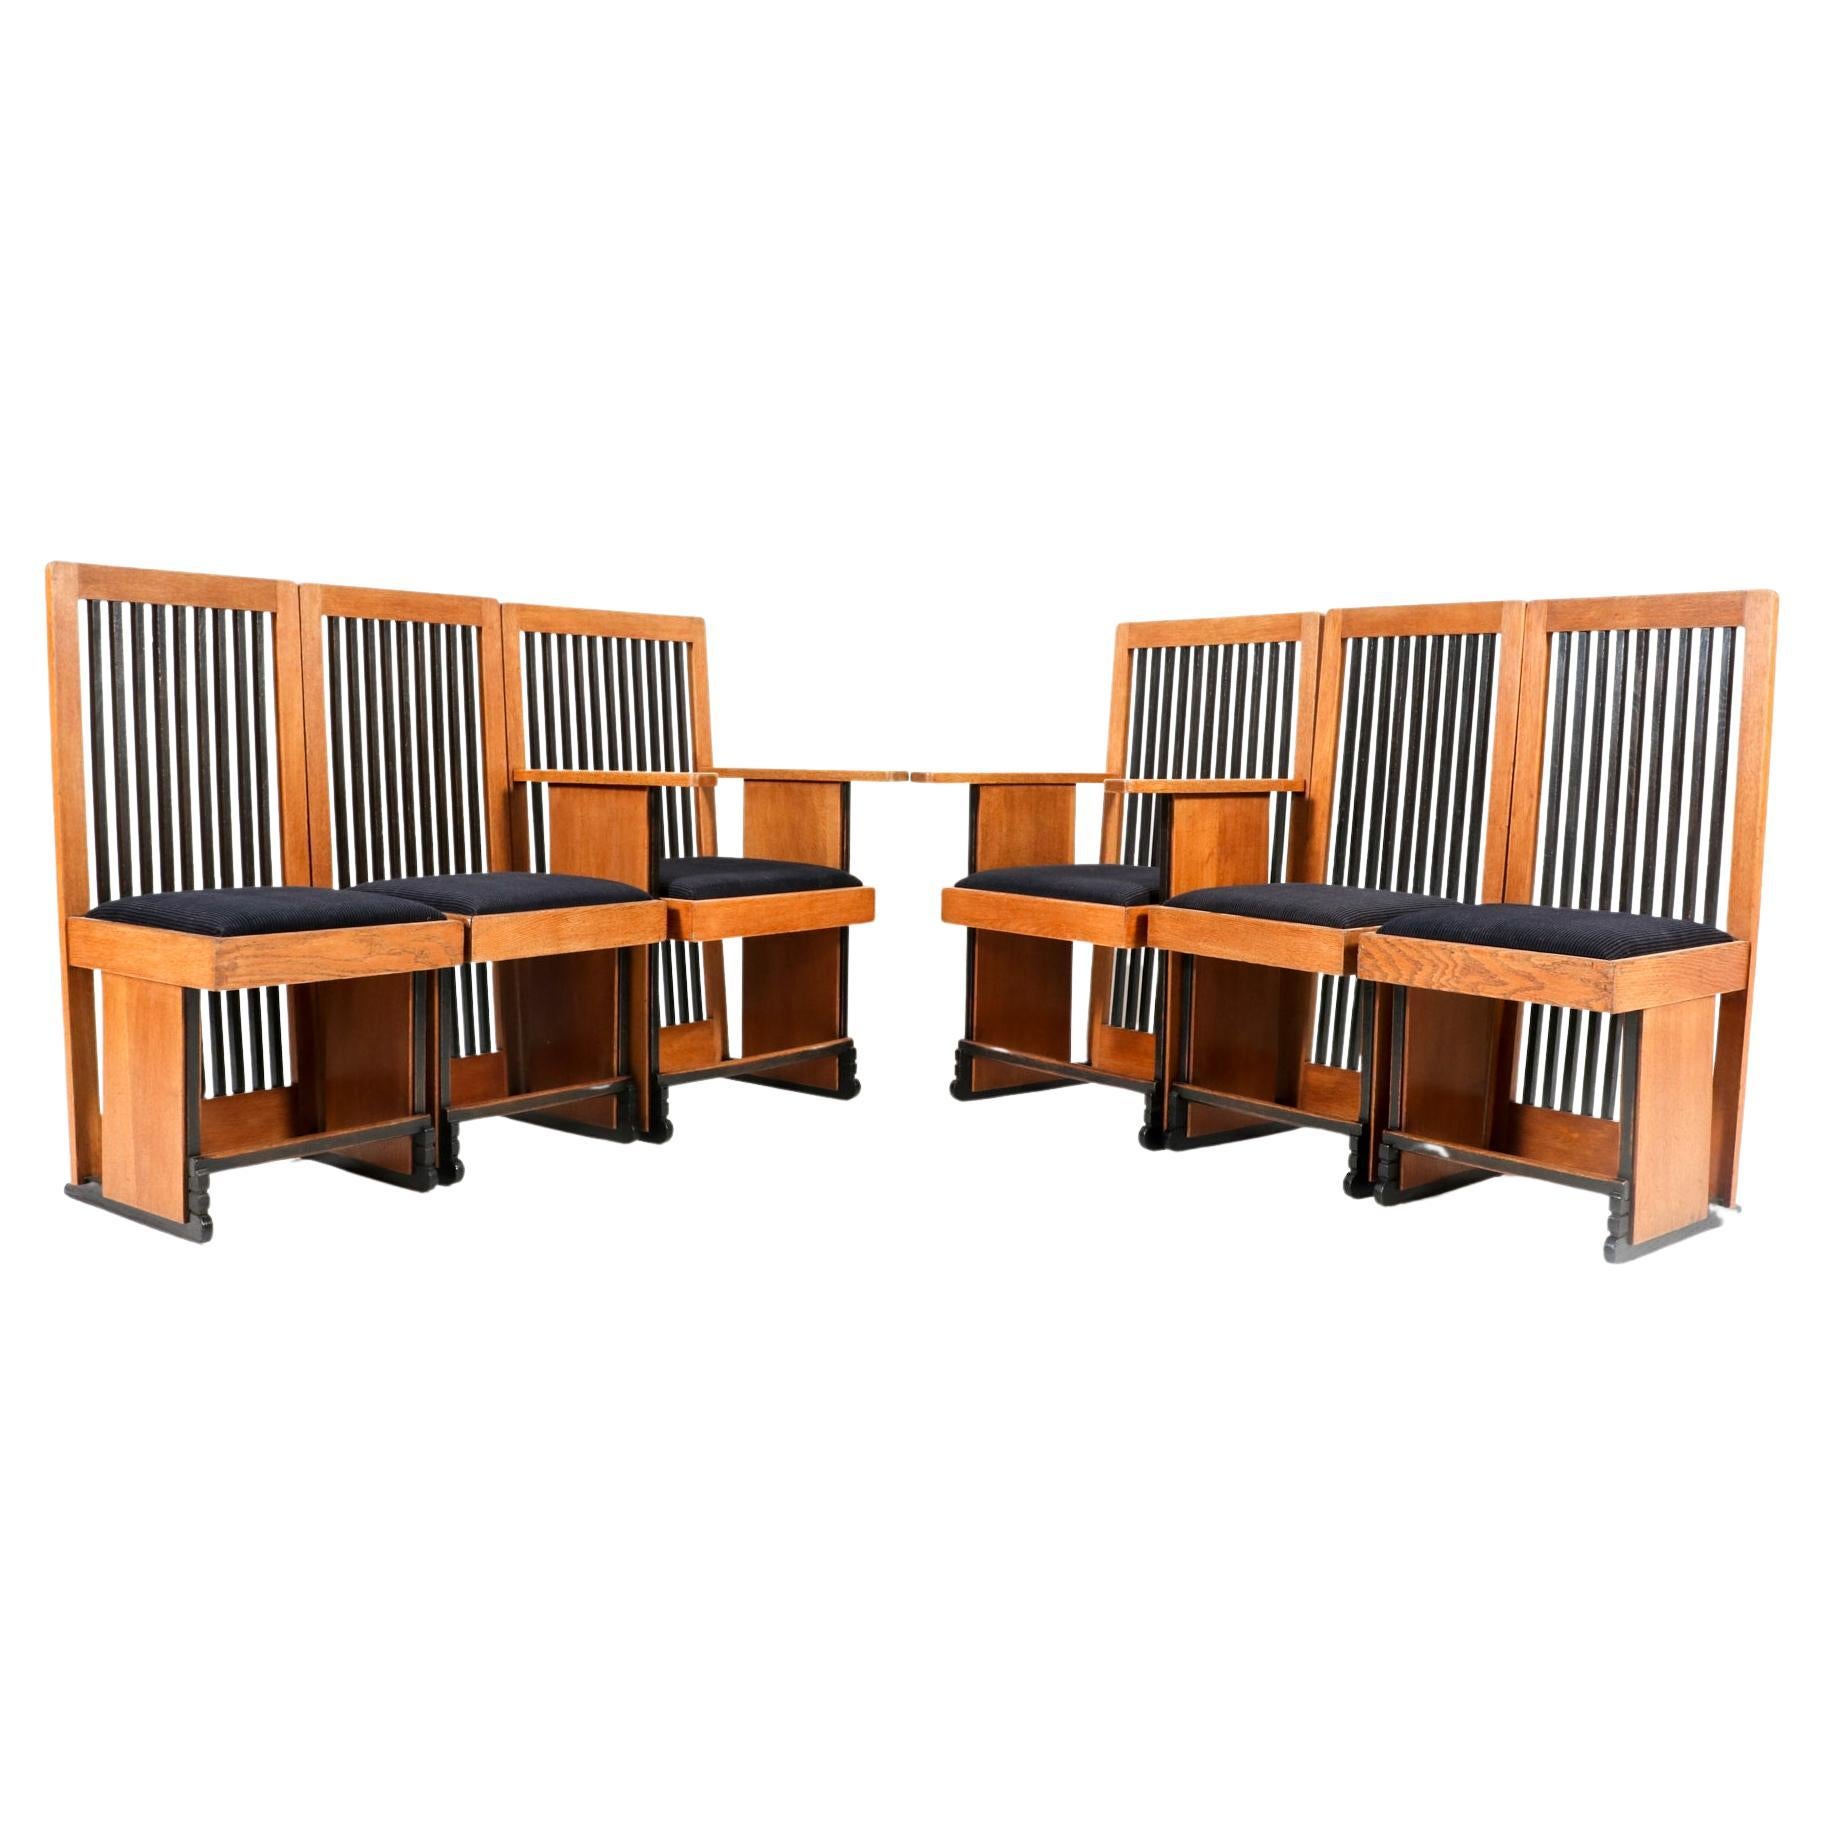  Oak Art Deco Modernist High Back Dining Room Chairs by Architect Caspers, 1920s